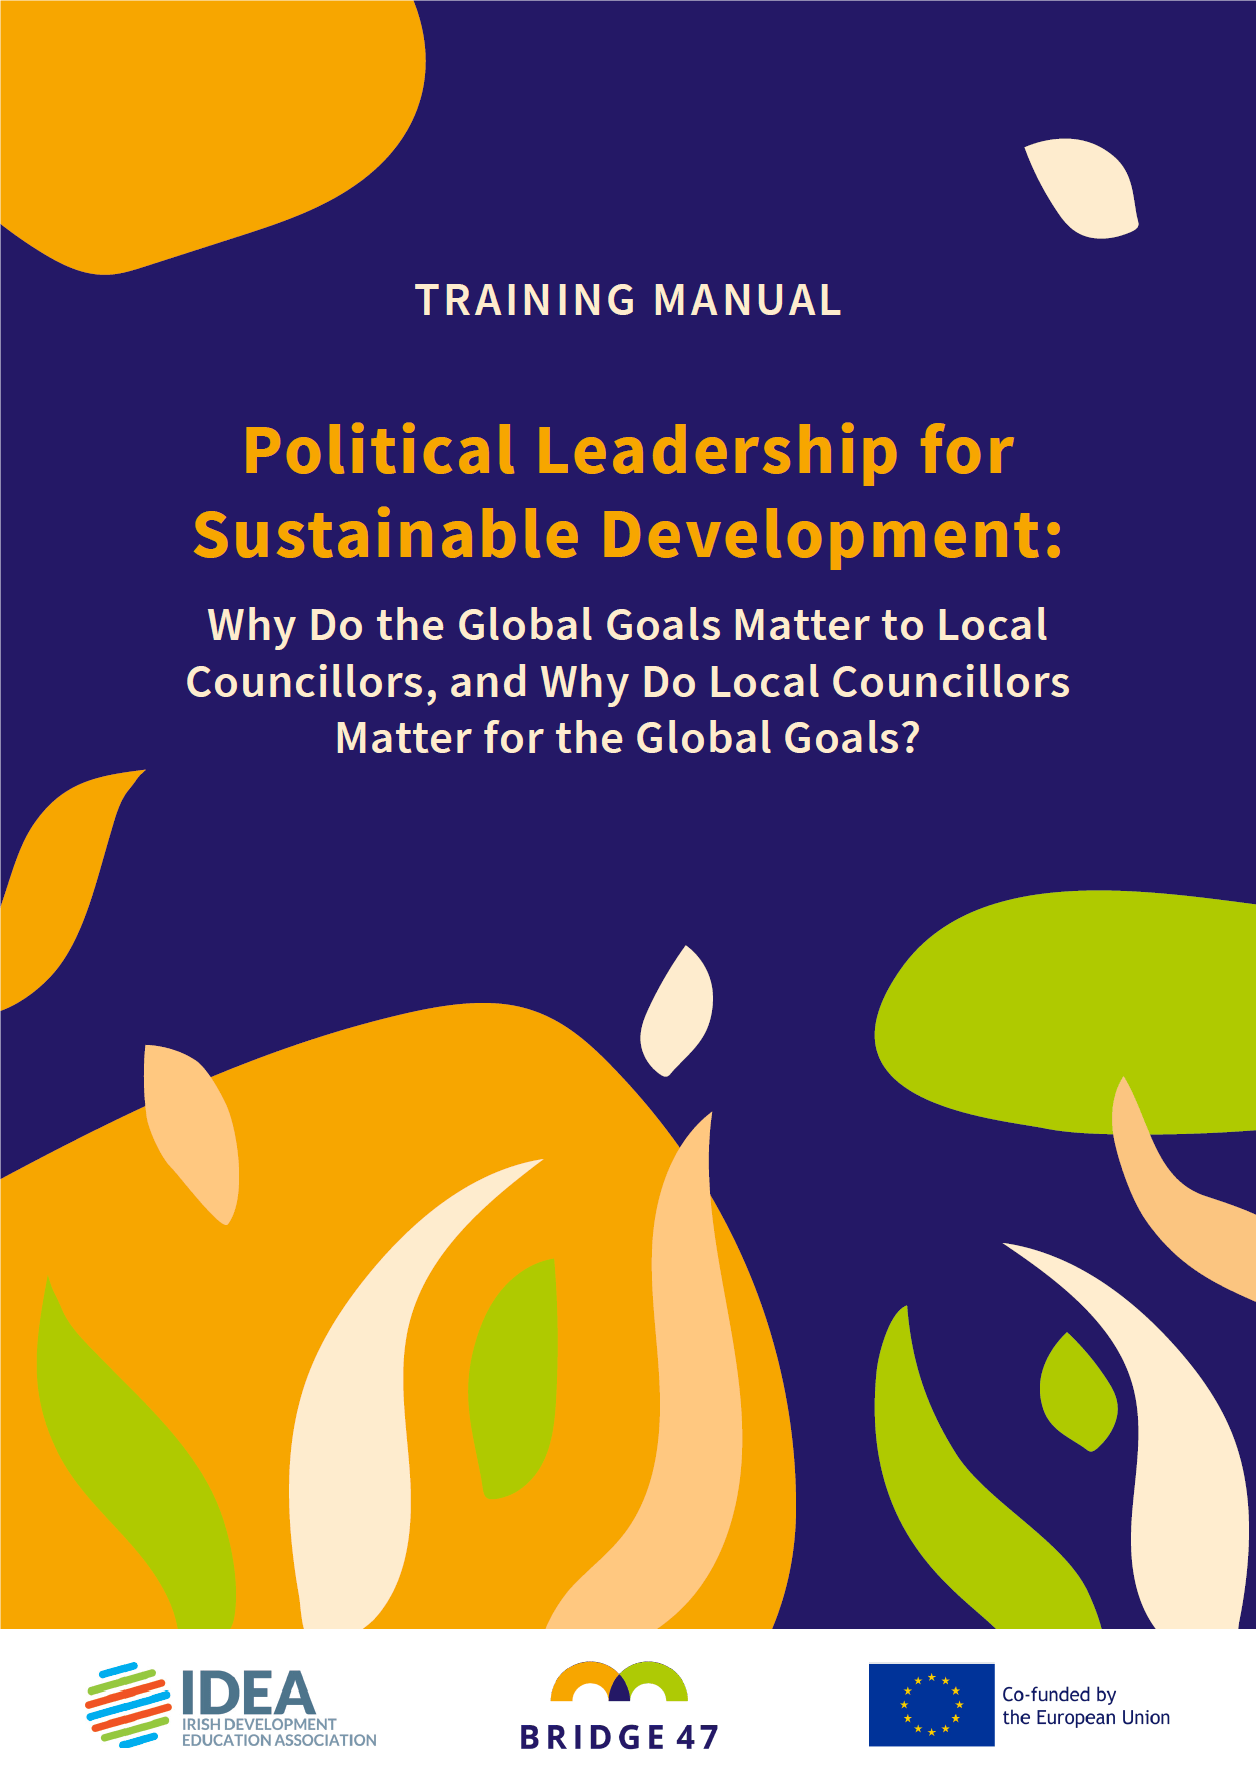 a training manual for political leadership for sustainable development